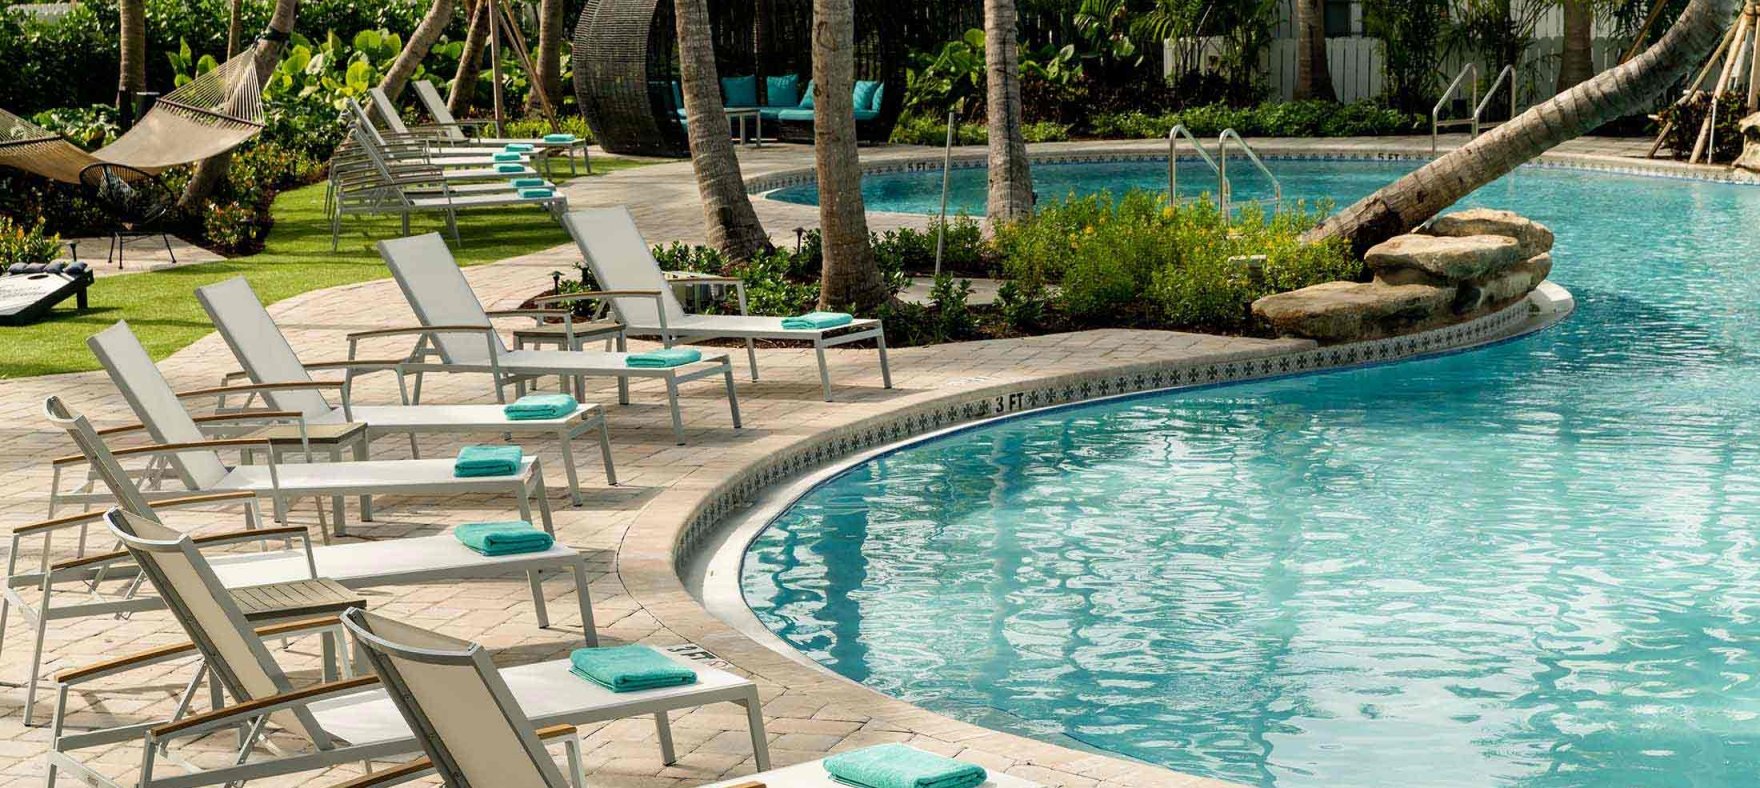 Lounge chairs set up in a curve next to the outdoor pool